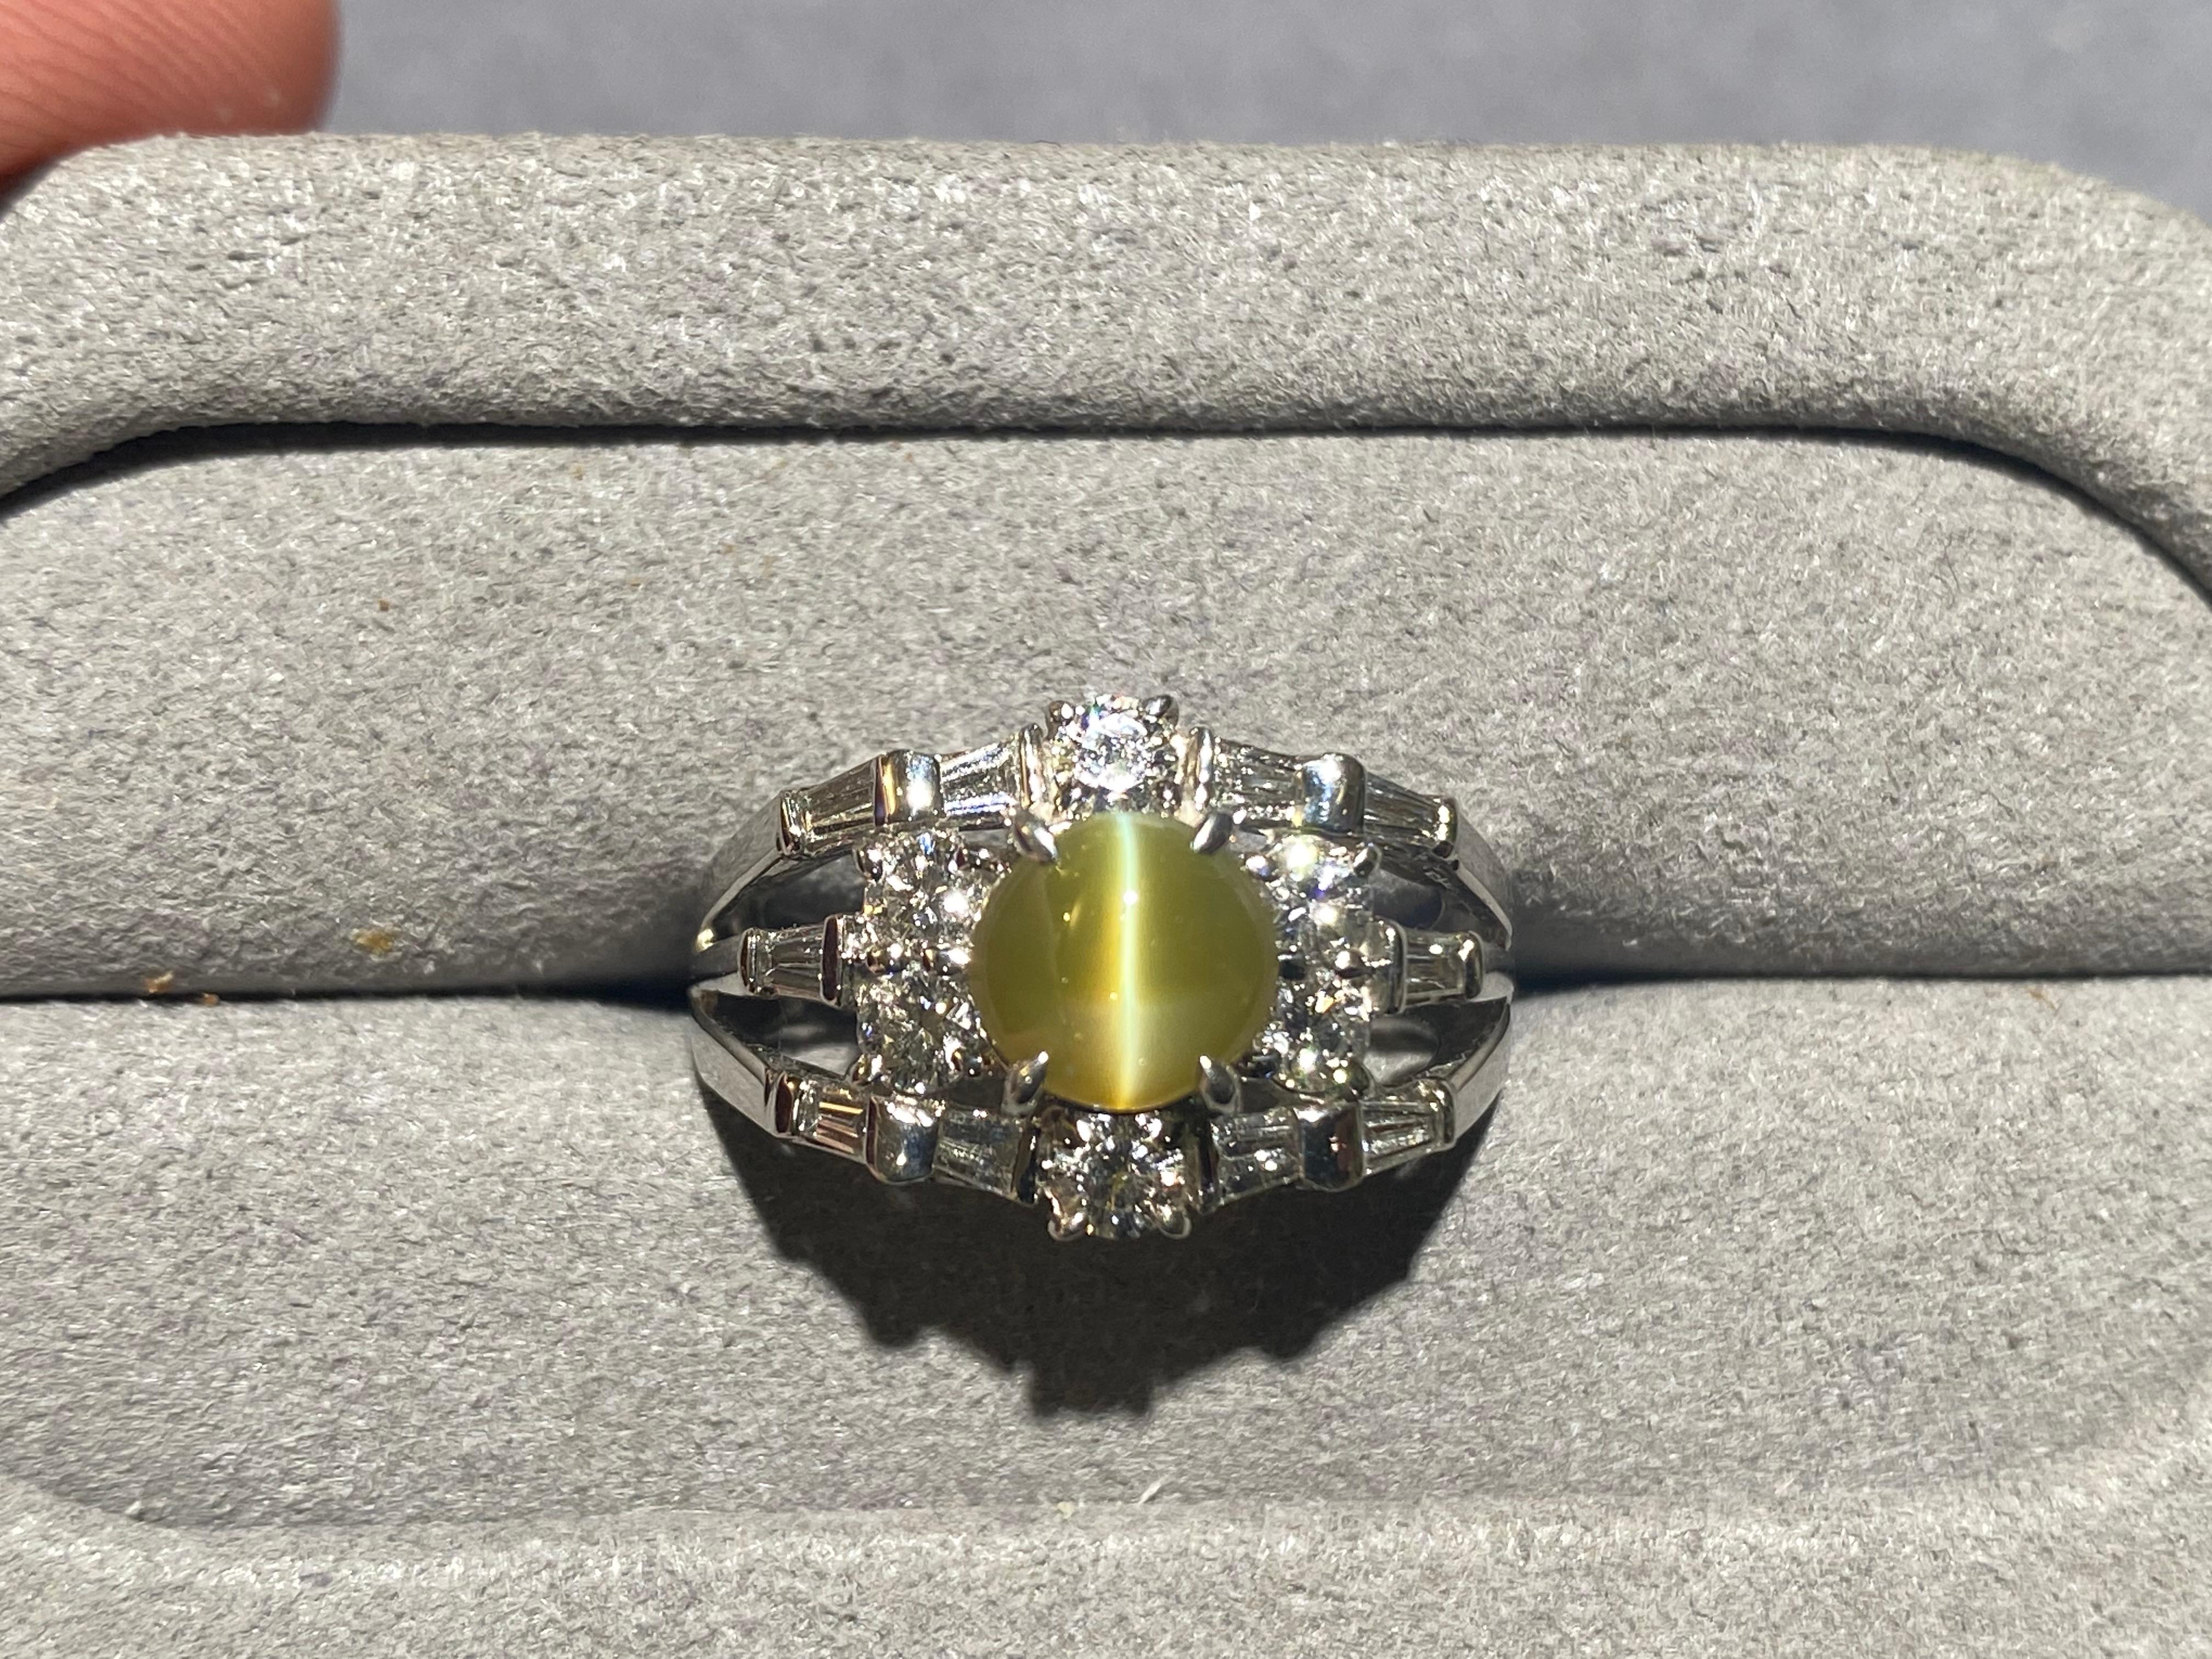 A Cat's Eye Chrysoberyl and diamond ring in 18k white gold. The chrysoberyl is in greenish honey colour with good translucency. The Chatoyancy effect of this stone is sharp and clear which is highly desirable. The chrysoberyl is then surrounded by 6